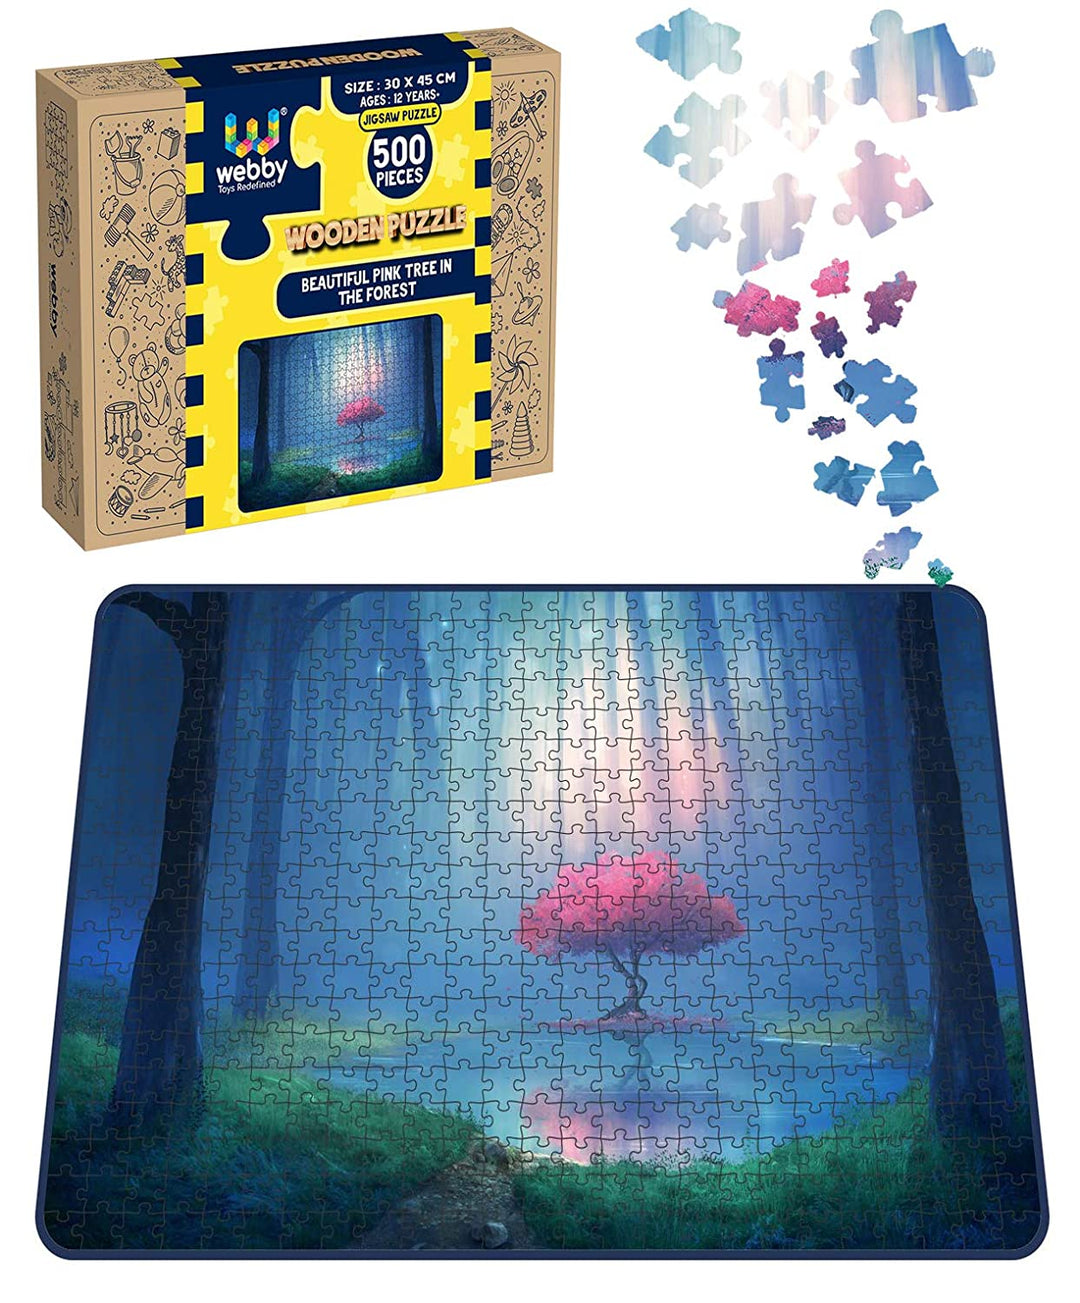 Webby Beautiful Pink Tree in the Forest Wooden Jigsaw Puzzle, 500 pieces